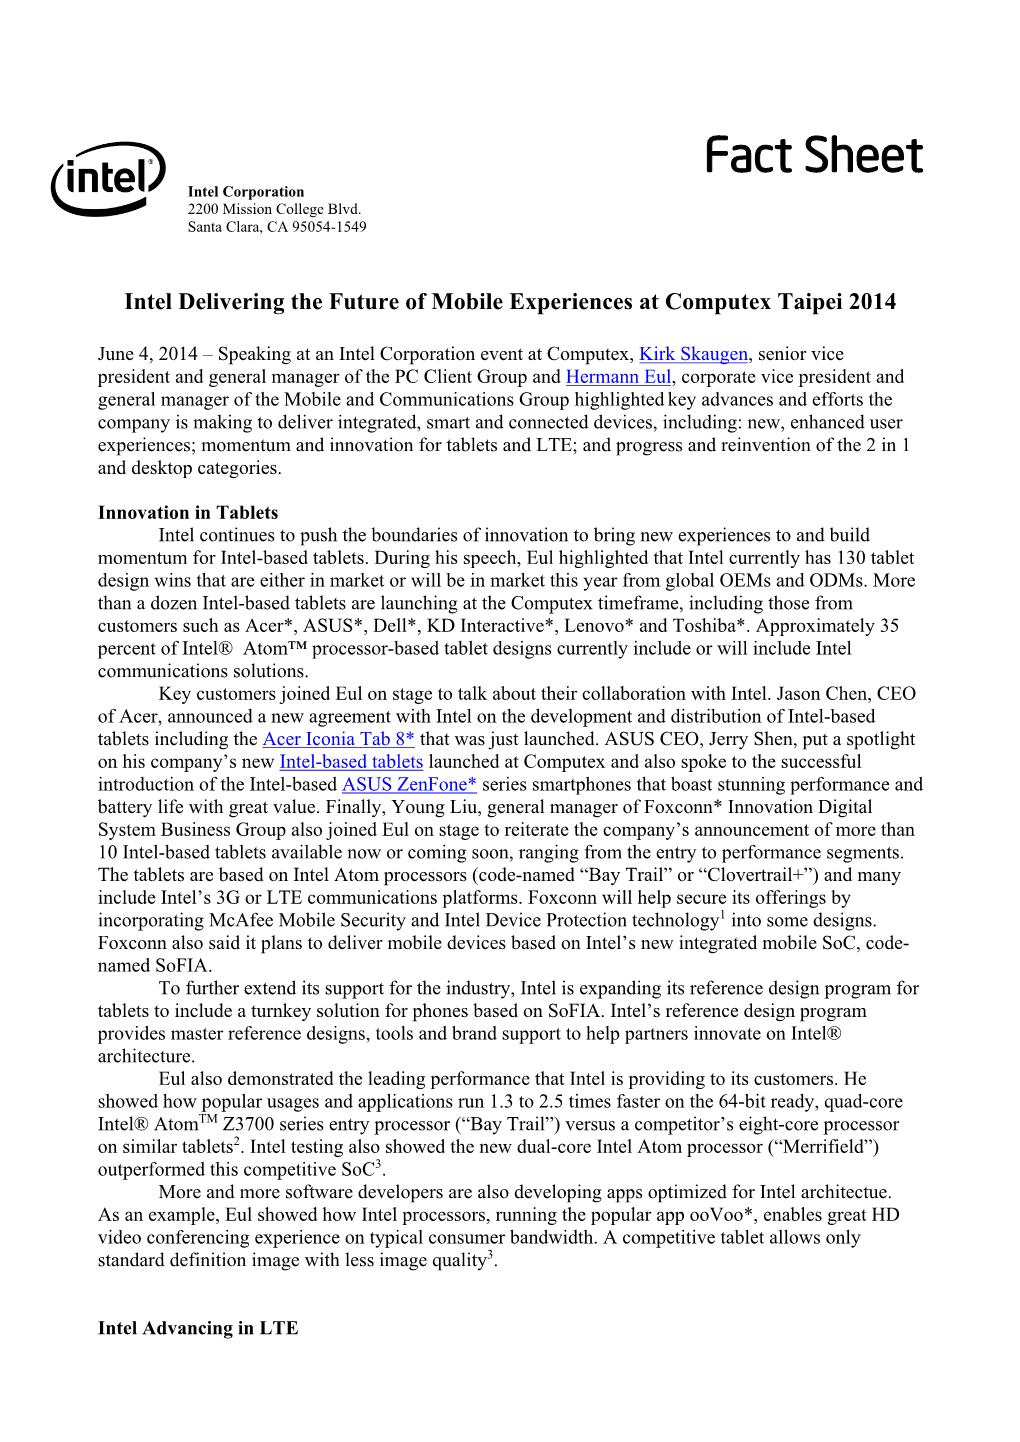 Fact Sheet: Intel Delivering the Future of Mobile Experiences at Computex